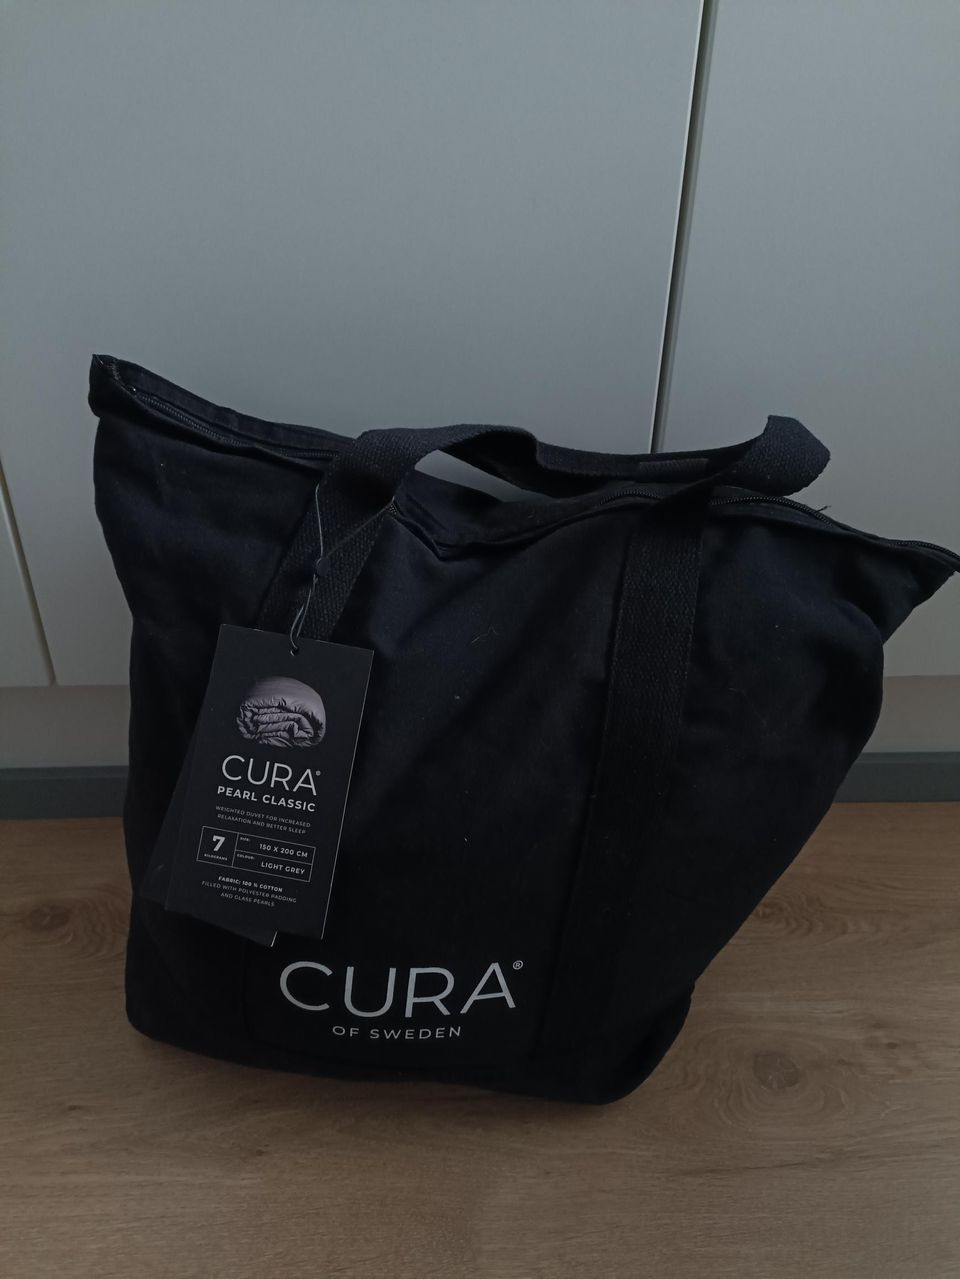 Cura of Sweden painopeitto 7kg